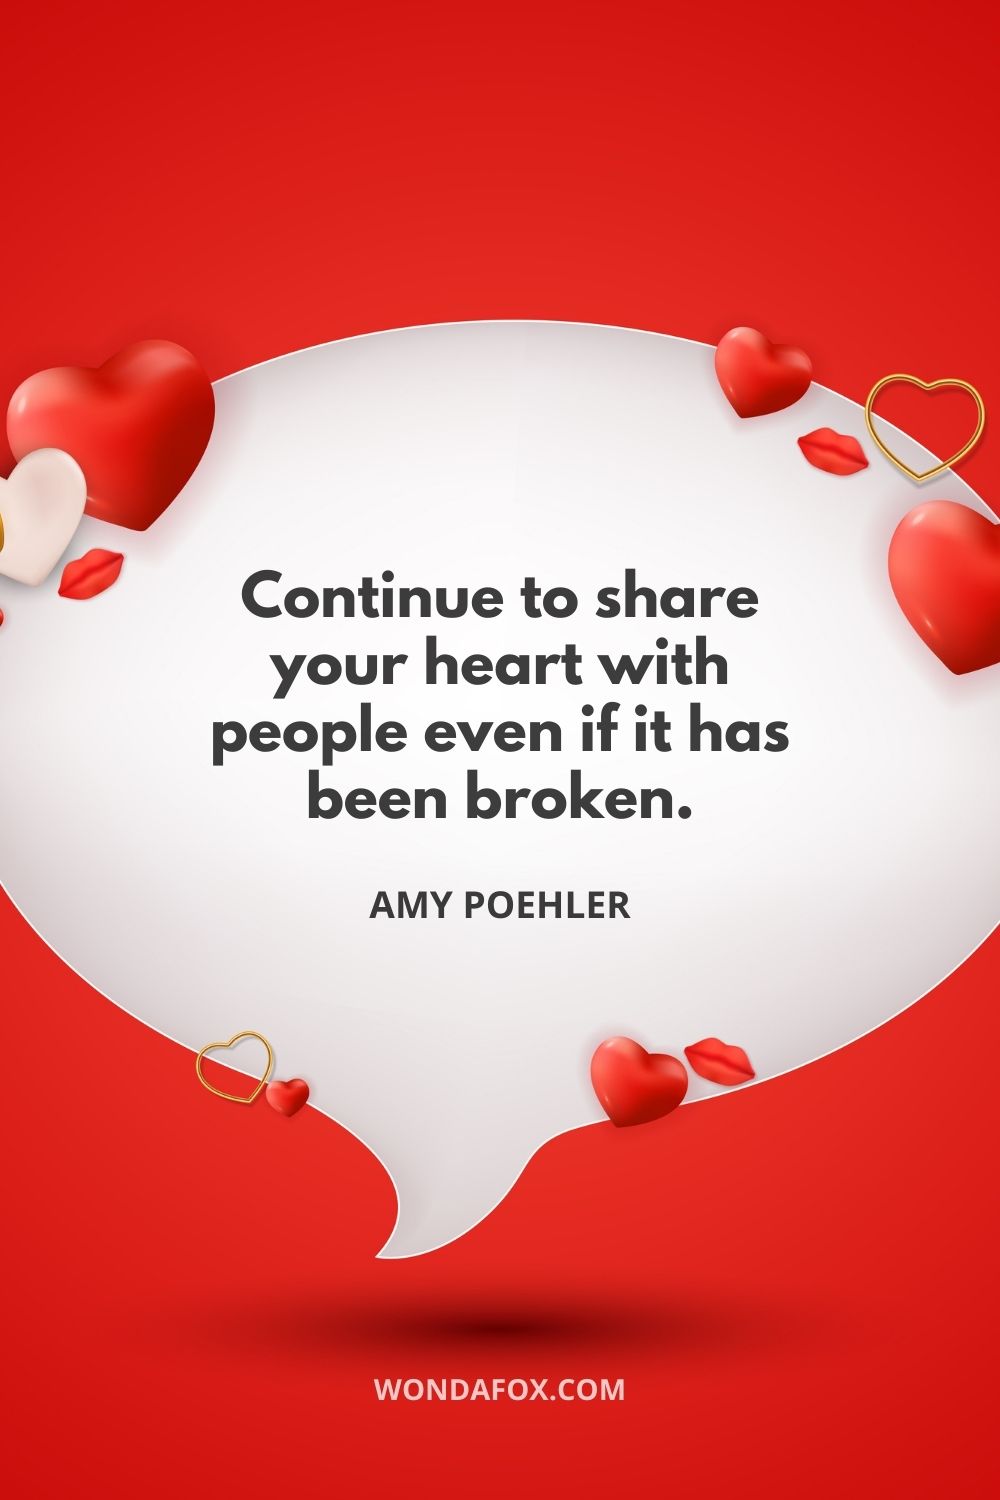 Continue to share your heart with people even if it has been broken.